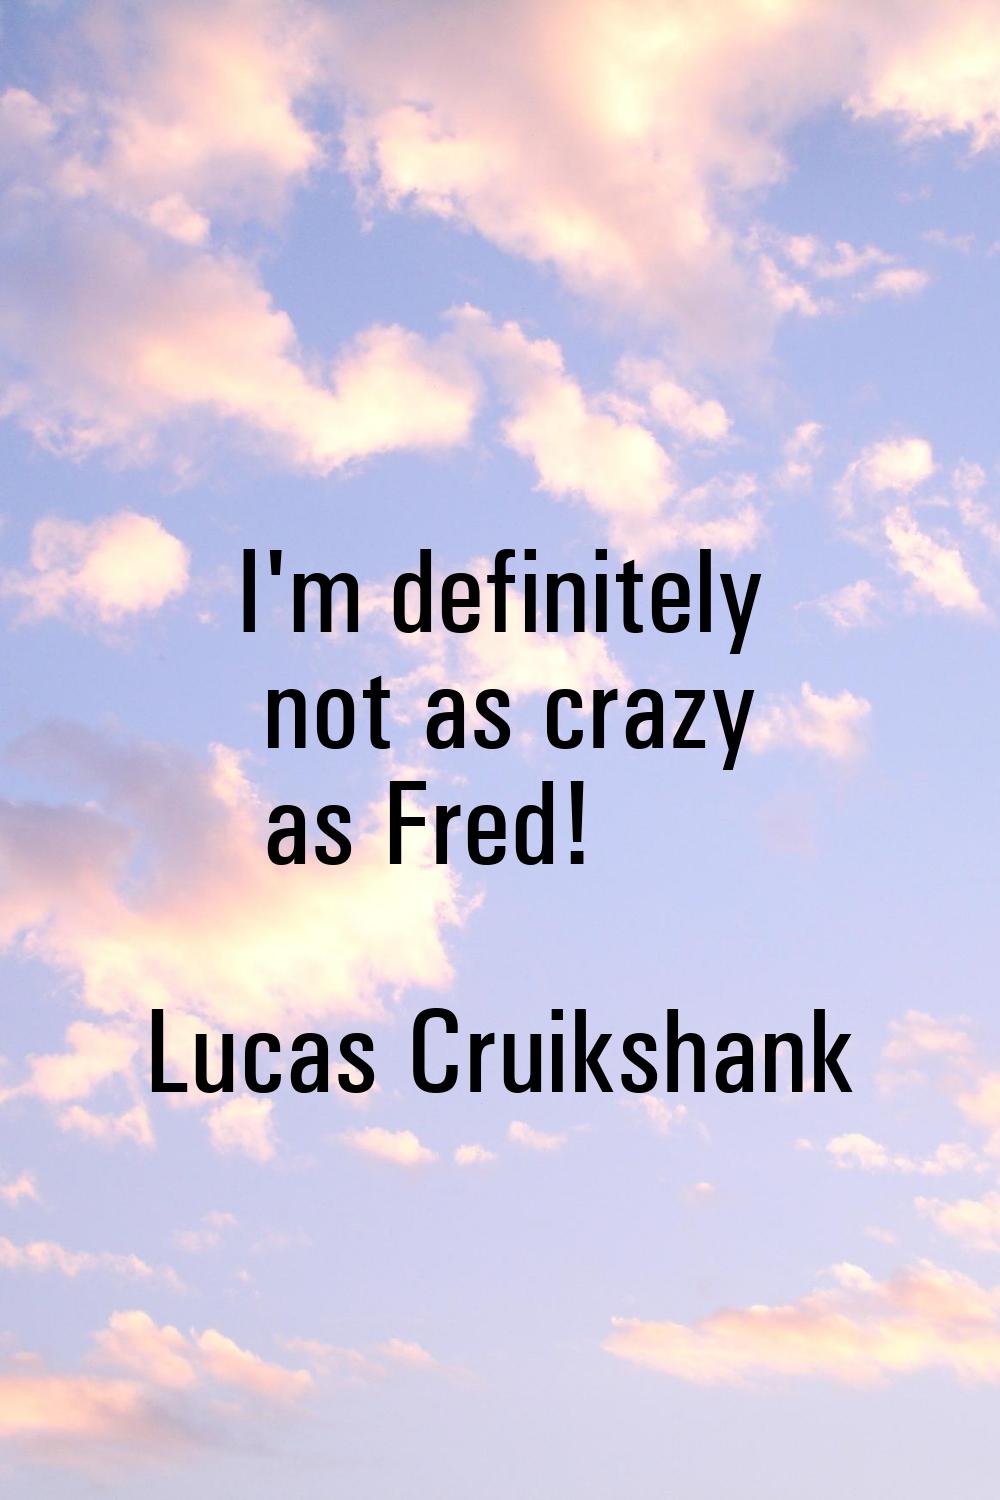 I'm definitely not as crazy as Fred!